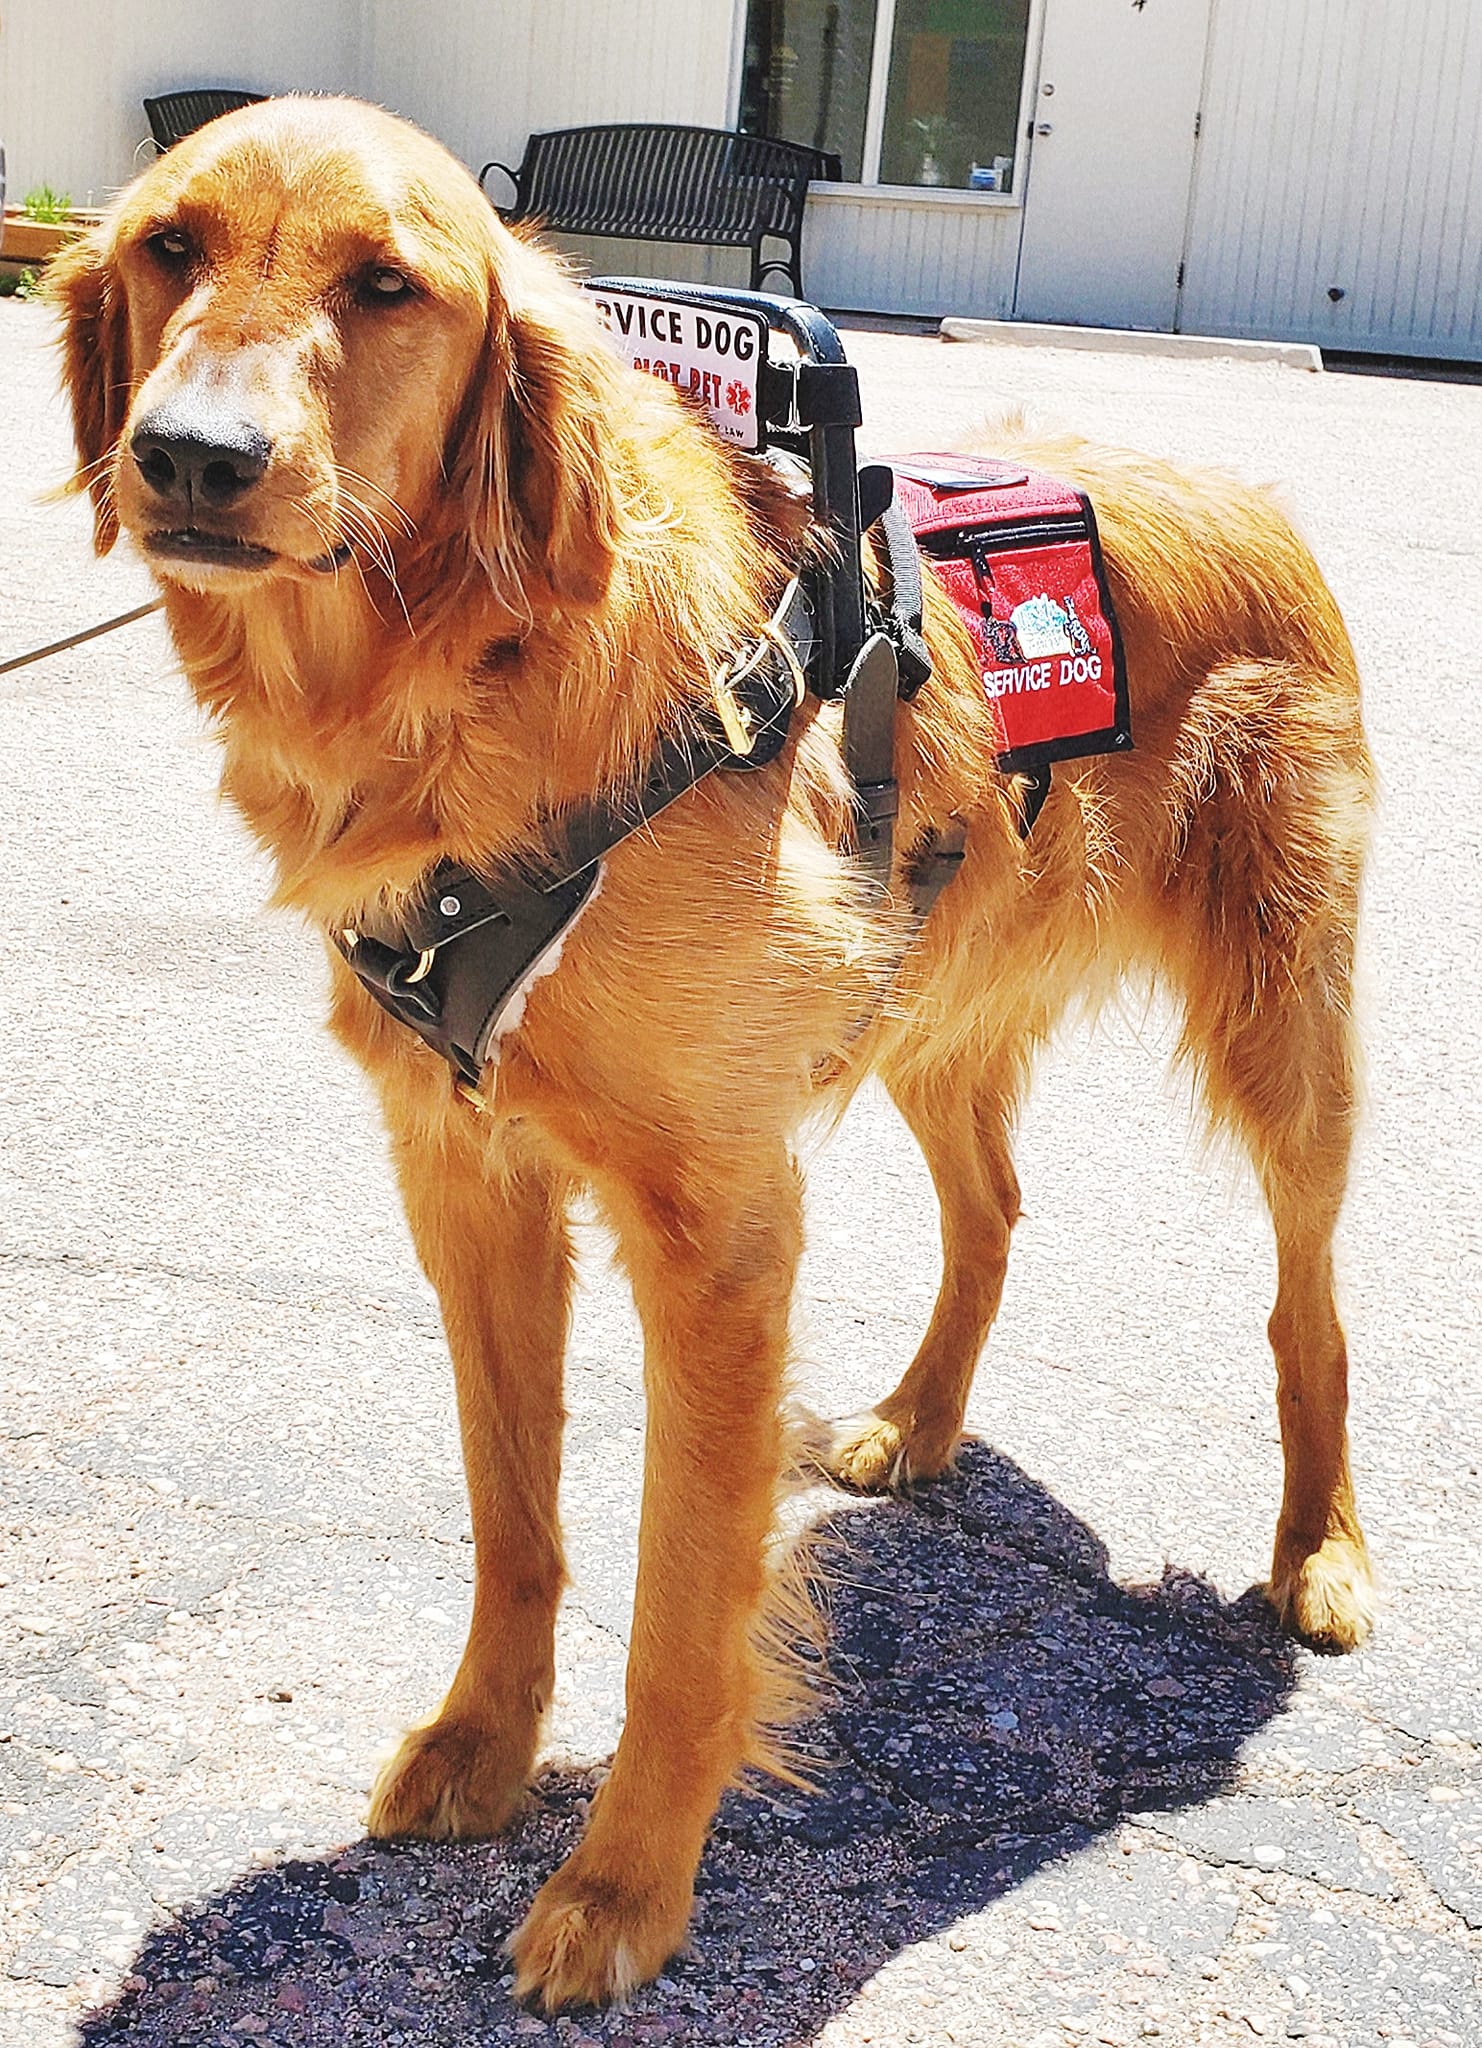 Service Dog Training Stand in Gear